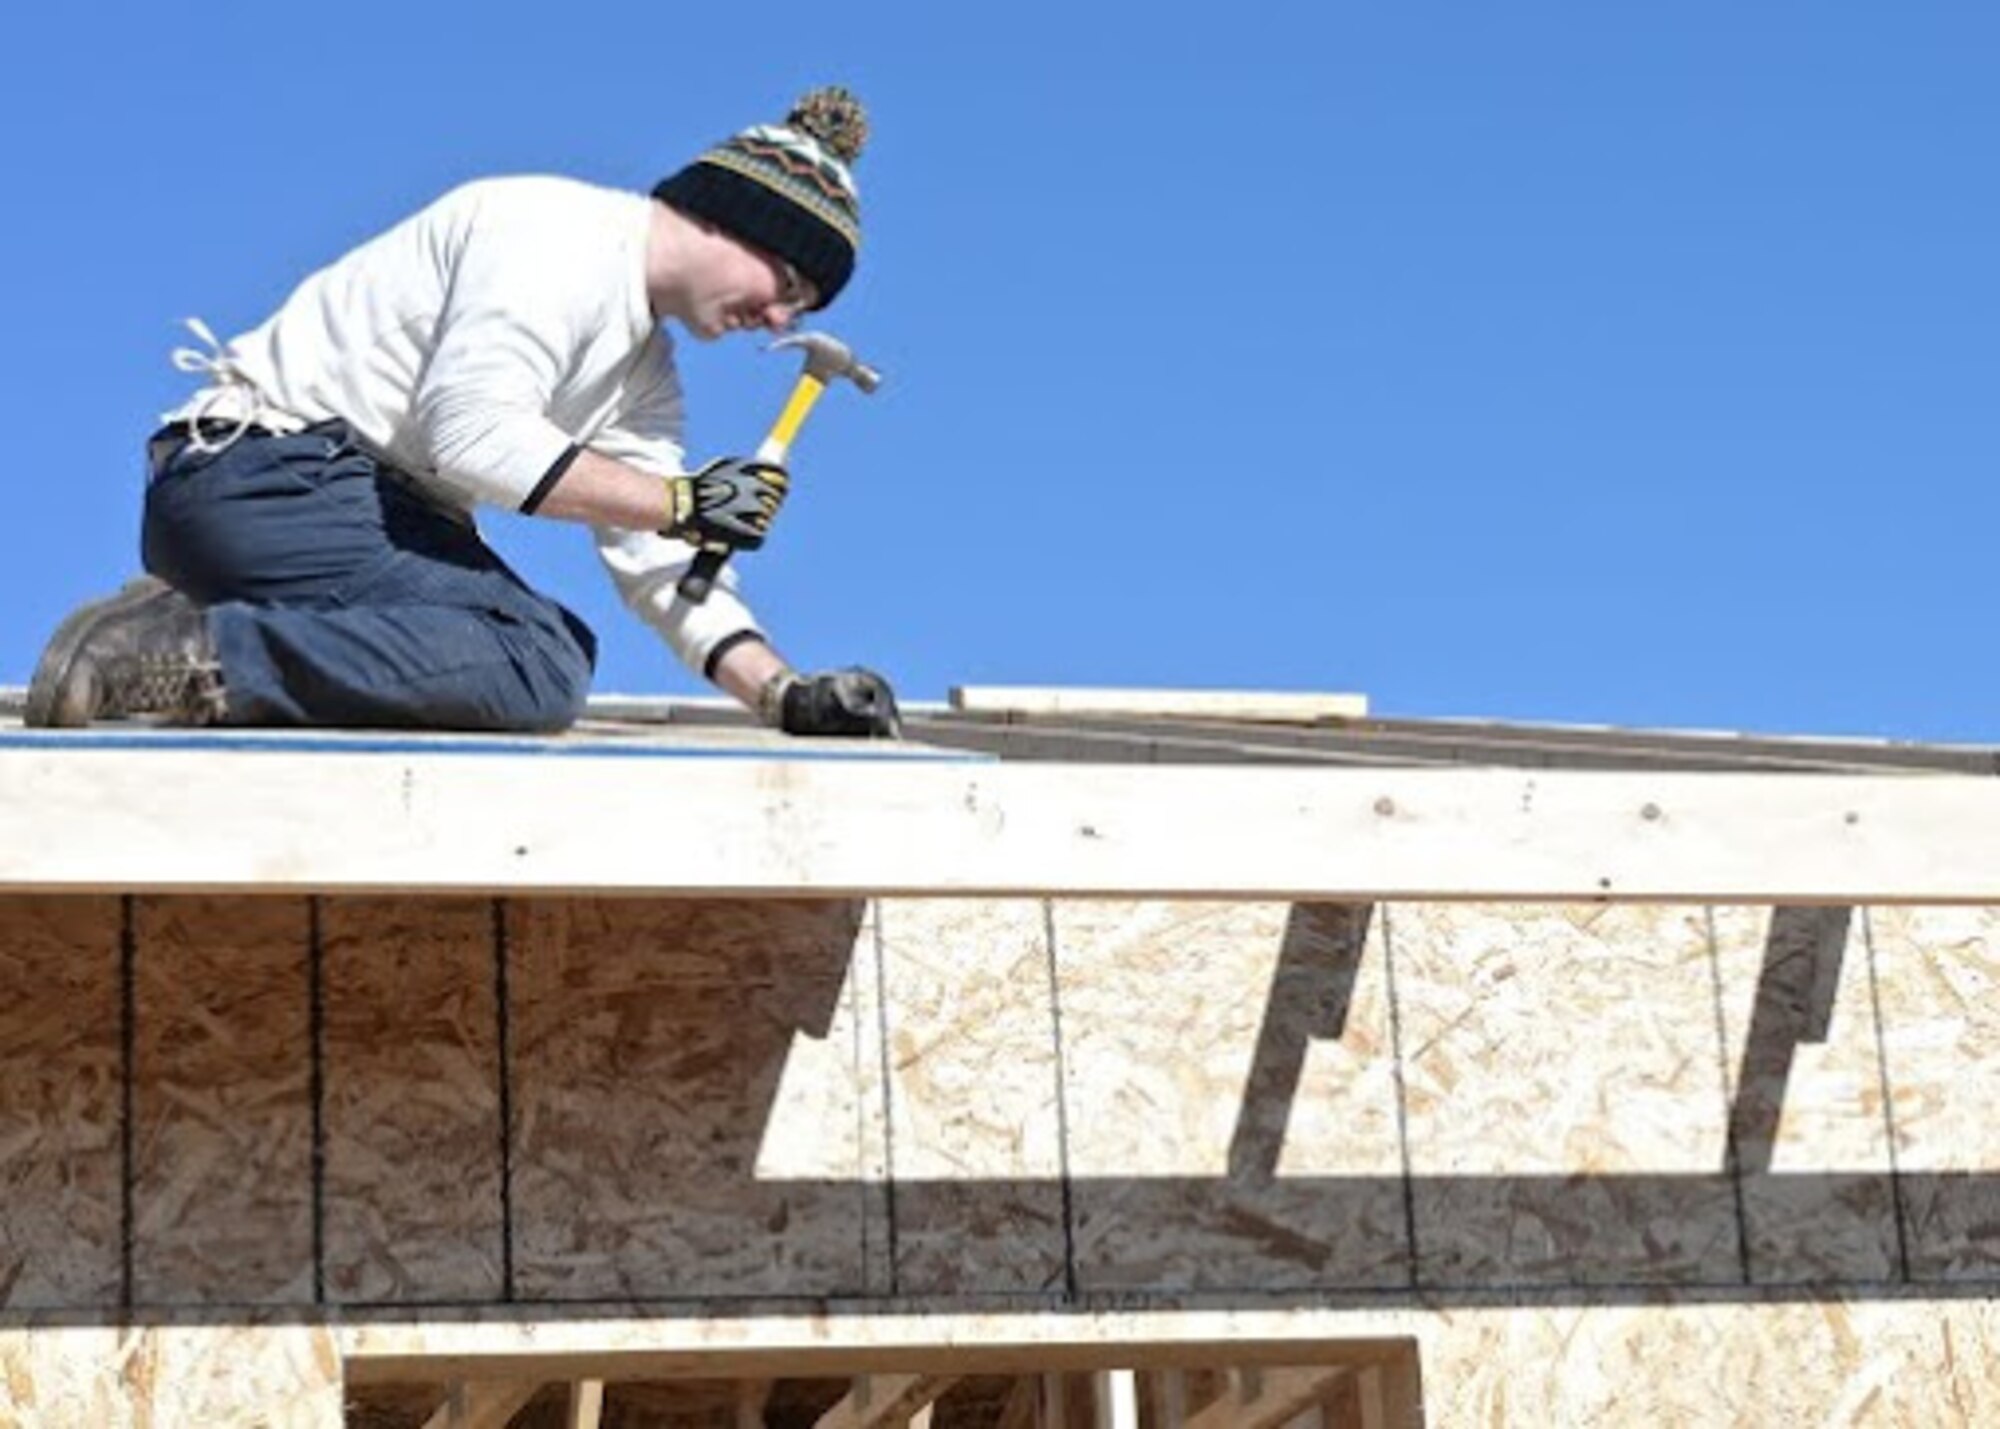 Senior Airman Travis Bellefeuille, 28th Operations Support Squadron targeteer, builds a roof during a Habitat for Humanity project in Summerset, S.D., Nov. 8, 2014. Bellefeuille and several other Ellsworth Airmen dedicated their time constructing a roof for a house that will be provided to a Habitat family in need. Habitat Black Hills Area volunteers have helped house over 300 people in the local area. (U.S. Air Force photo by Senior Airman Anania Tekurio/Released)